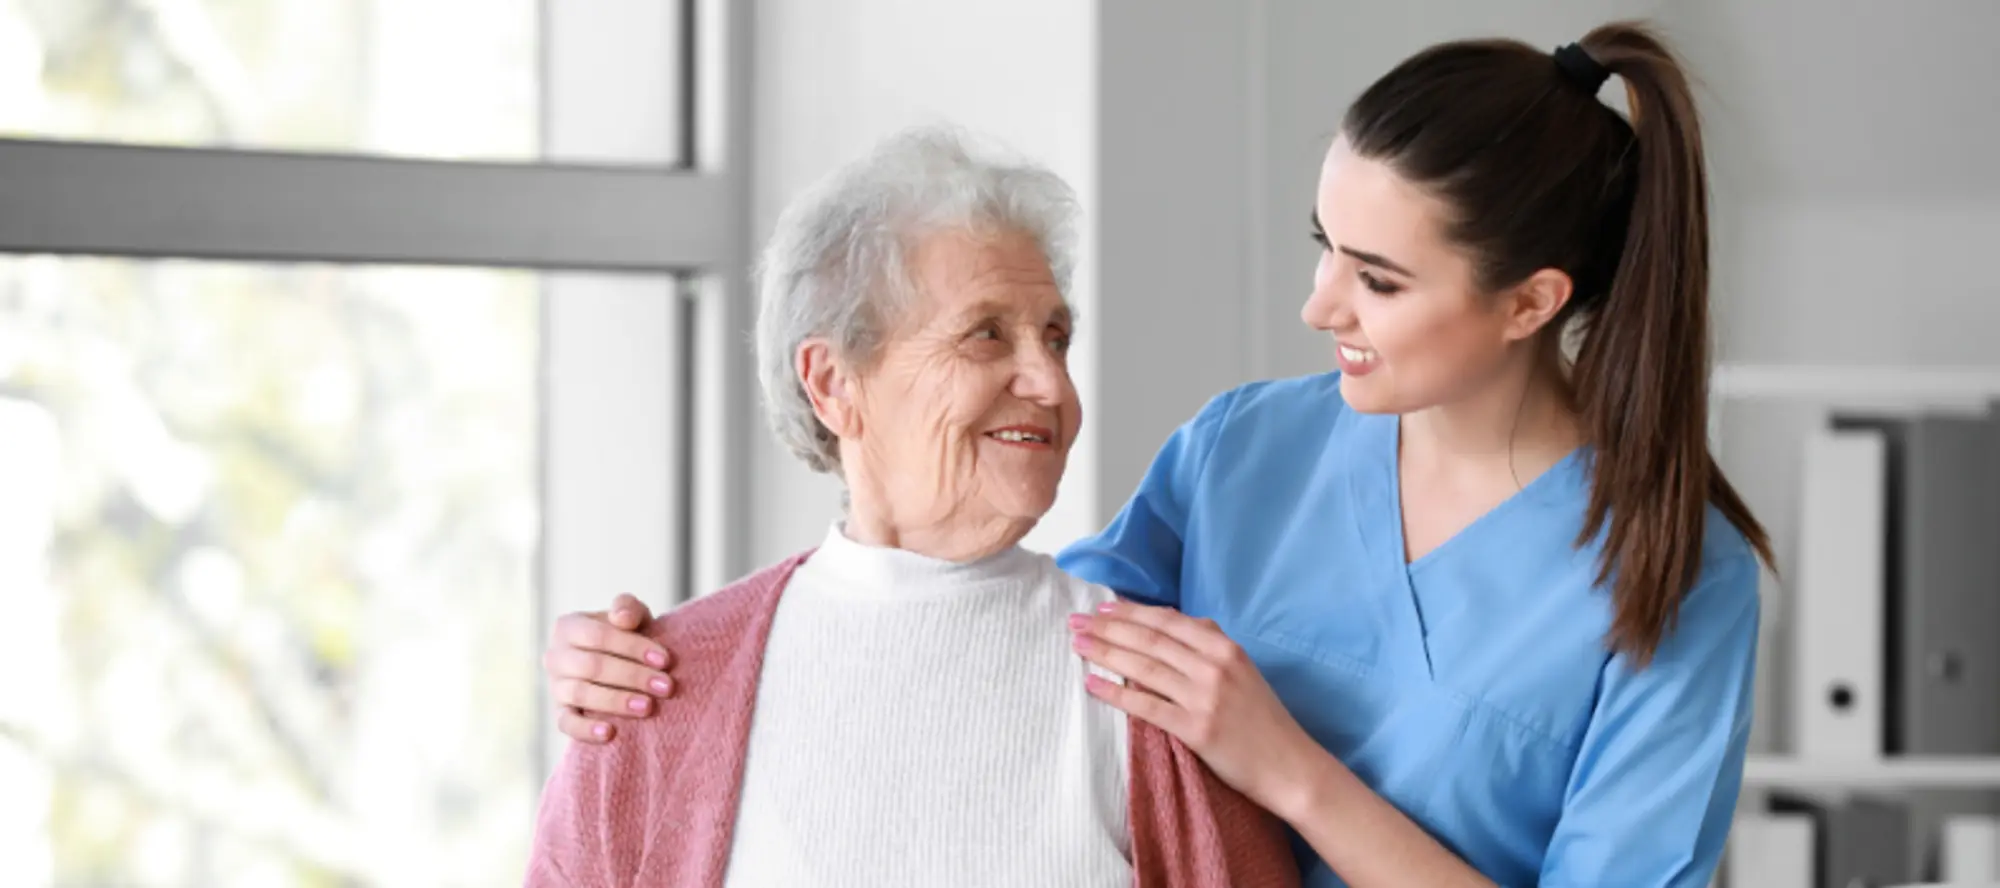 Conflict management in care home calm care worker